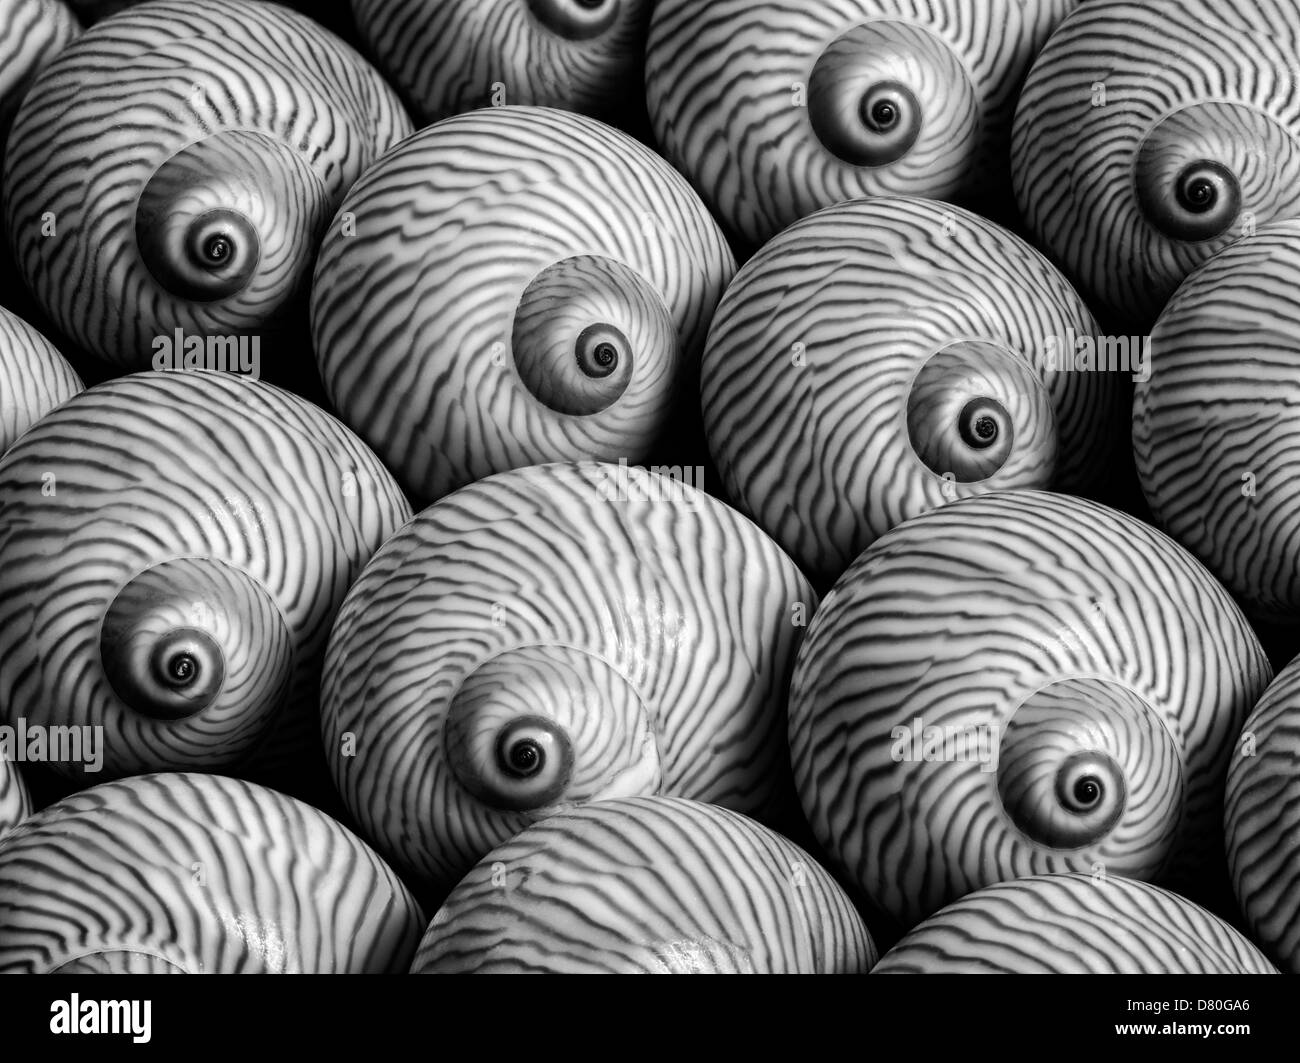 Close up of striped lune sea shell. Banque D'Images